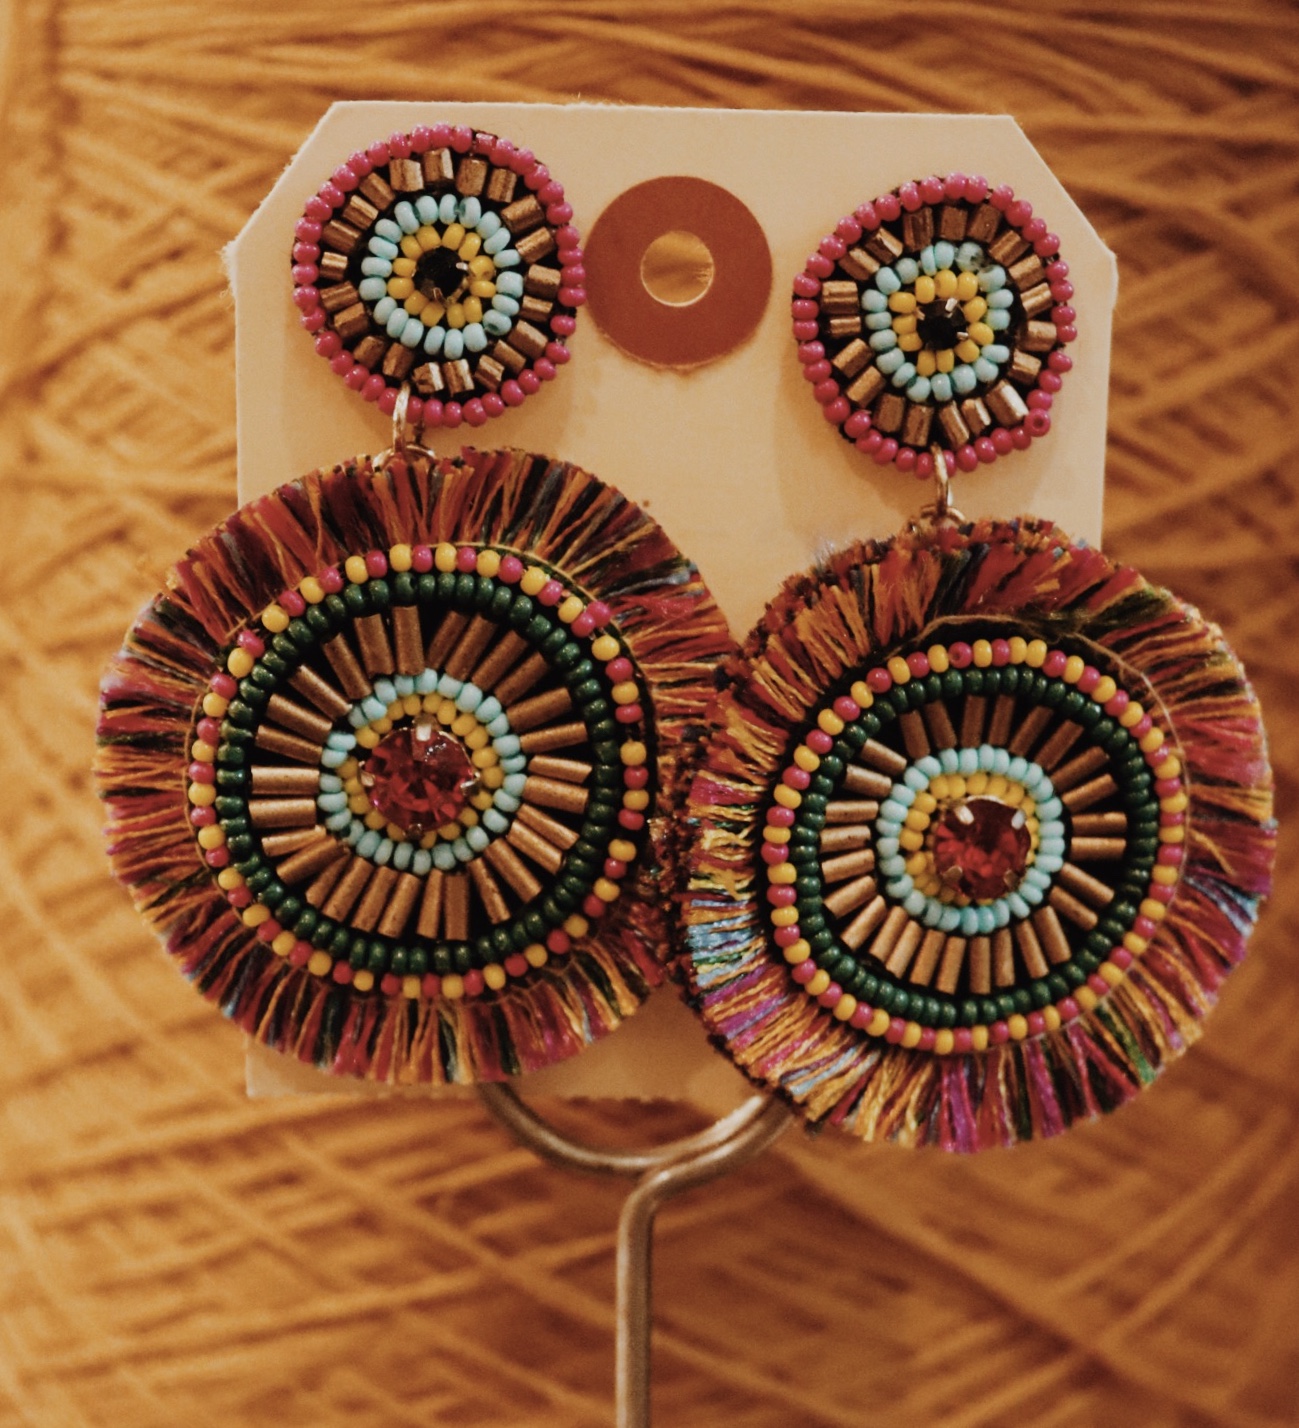 These fun earrings measure 3 inches long. They are so fun and colorful to add flare to any fit!